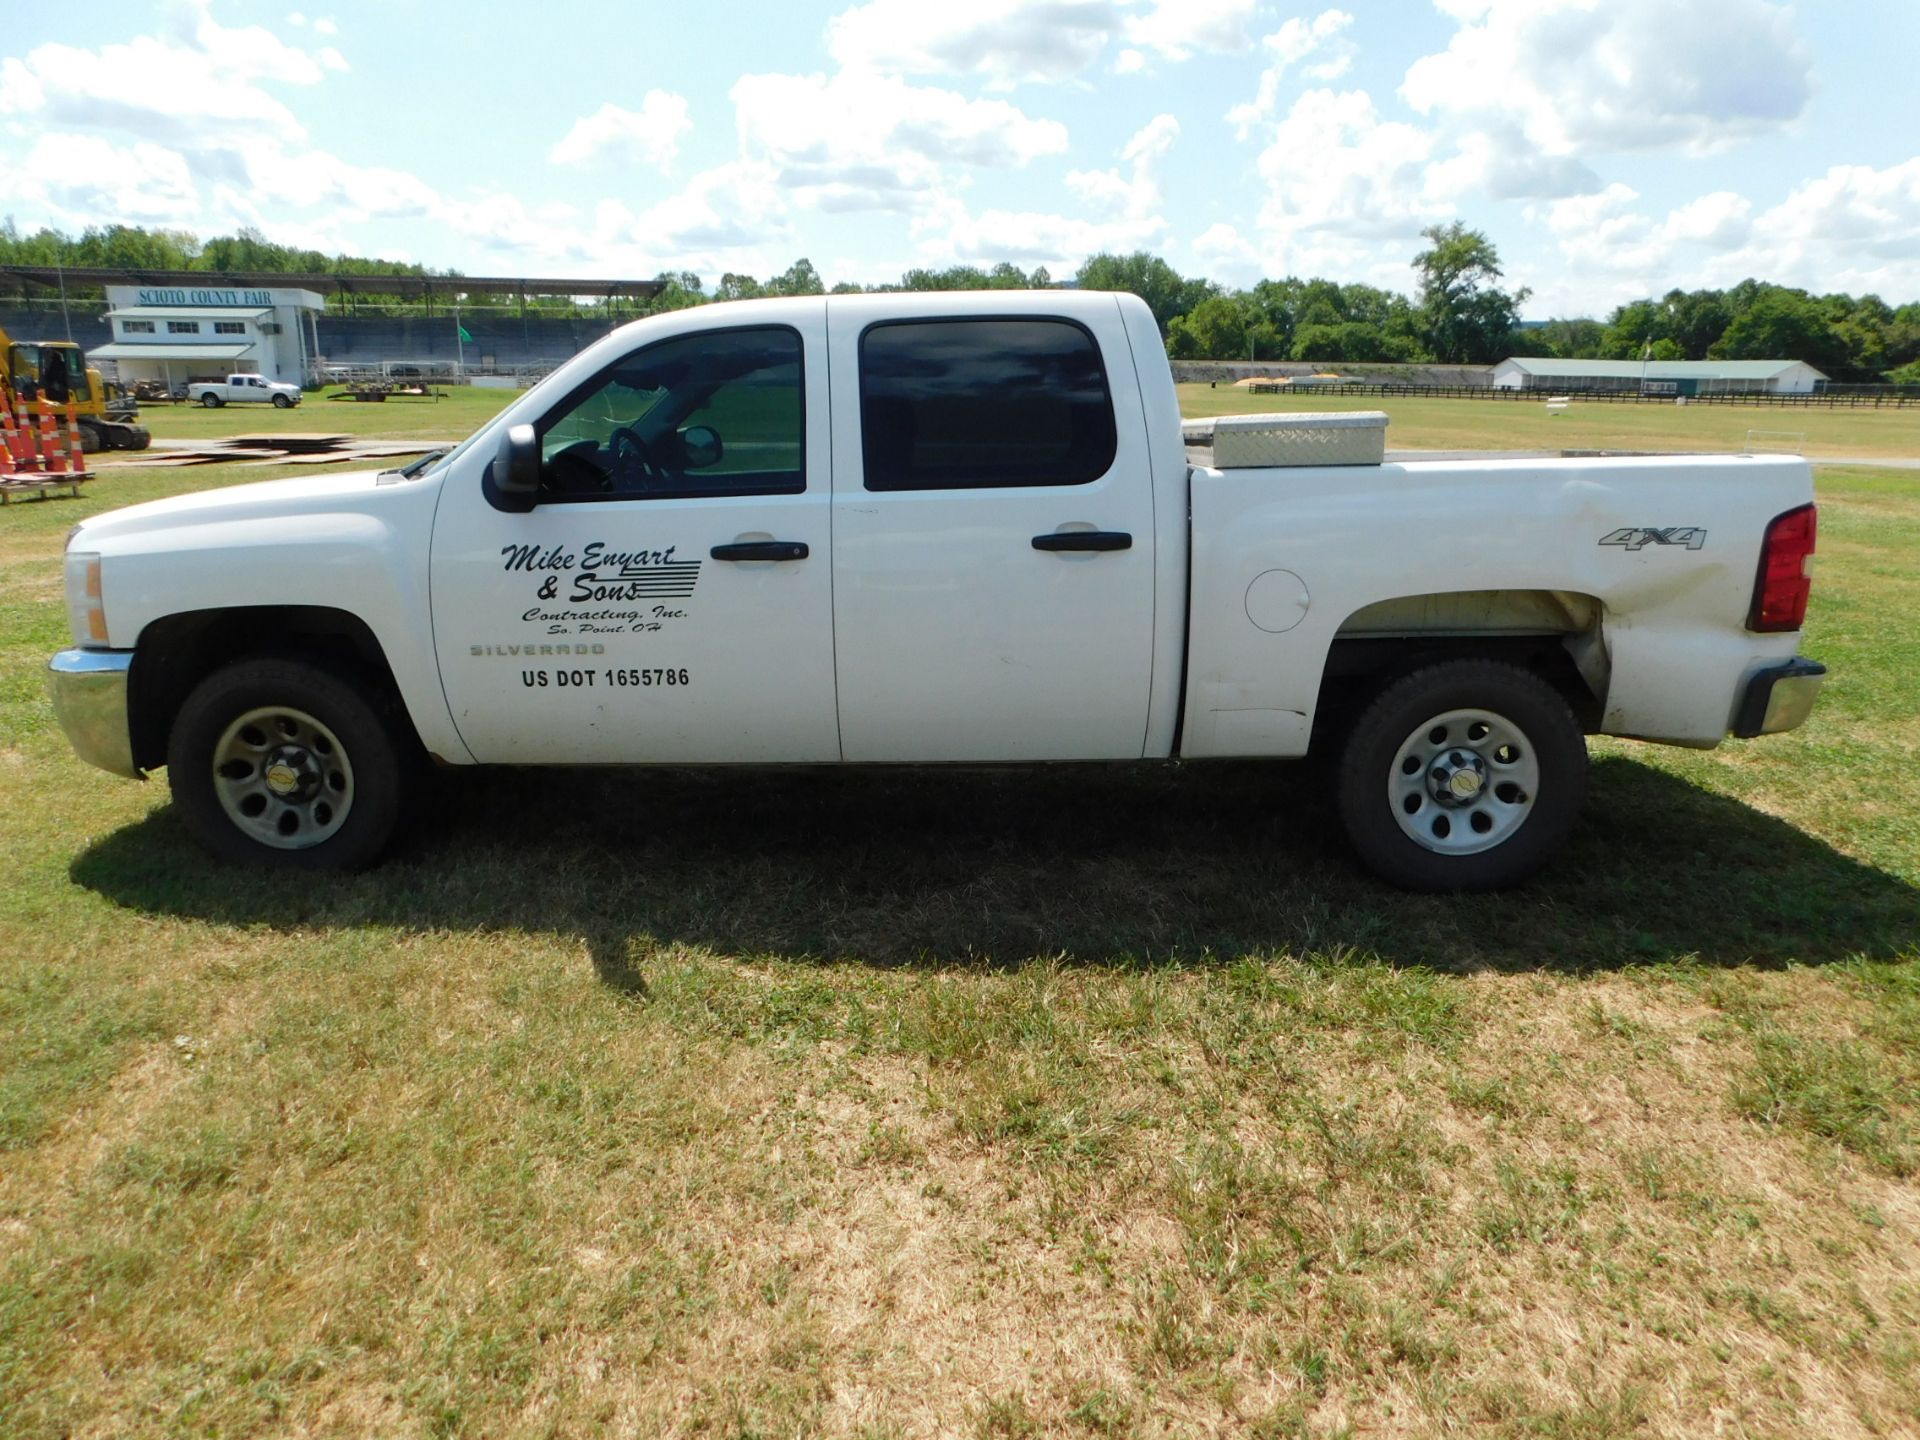 2011 Chevy 2500 Silverado Pickup, Crew Cab, 6' Bed, Automatic, AM/FM, 4WD, AC, PL, Aluminum Tool - Image 8 of 50